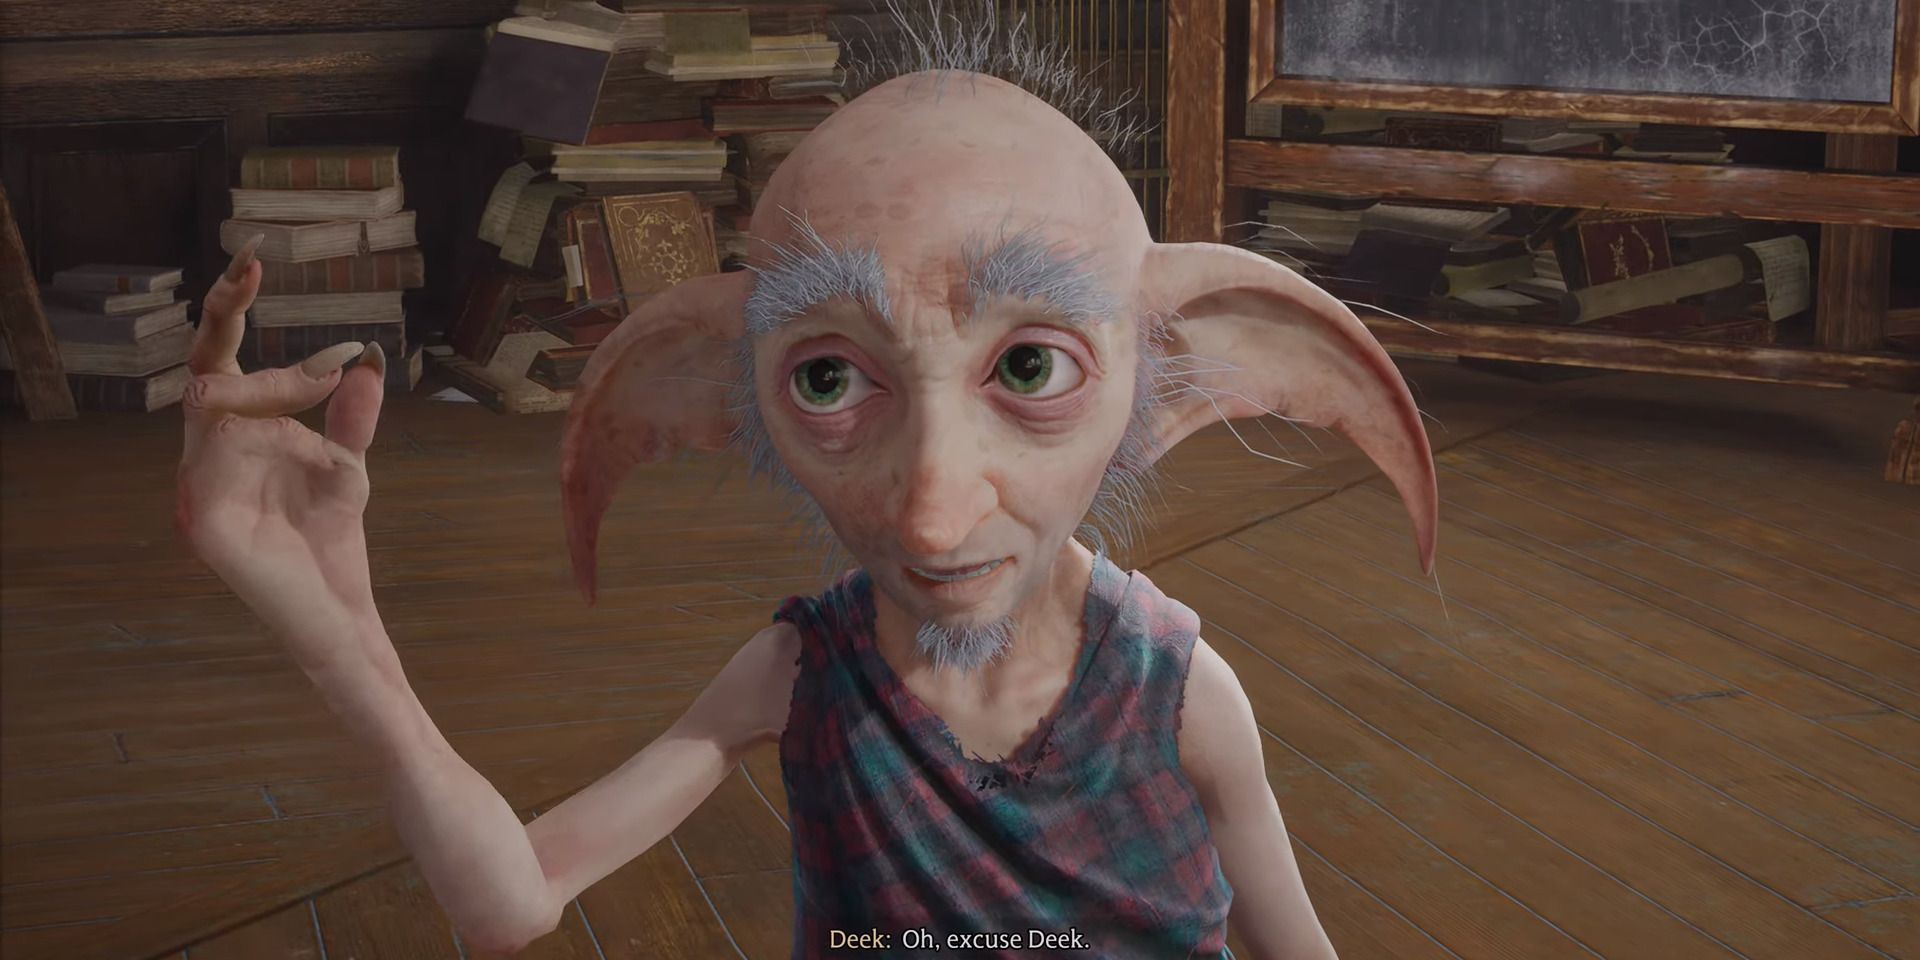 Image of the character Deek in a cutscene from Hogwarts Legacy.